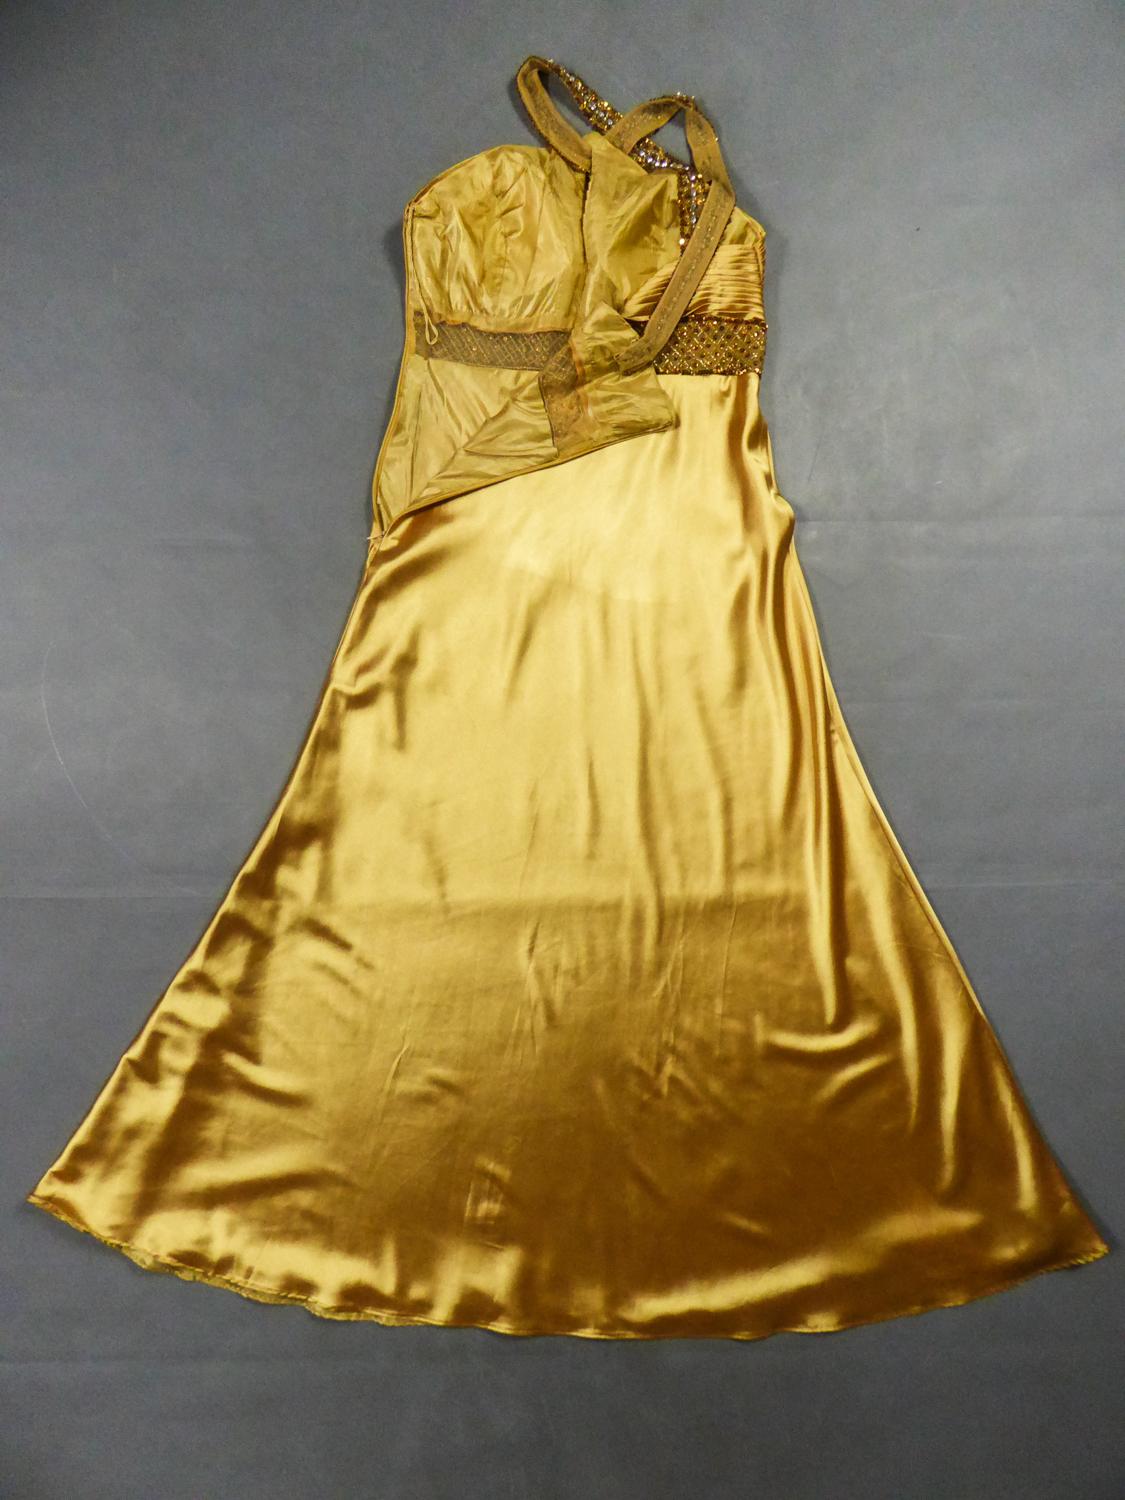 Circa 1980
France

Elegant Music-Hall evening dress in gold Duchess satin embroidered with sequins from the 1980s. Large backless cleavage with crossed straps and embroidered with sequins and rhinestones on cream tulle. High-waisted bustier with